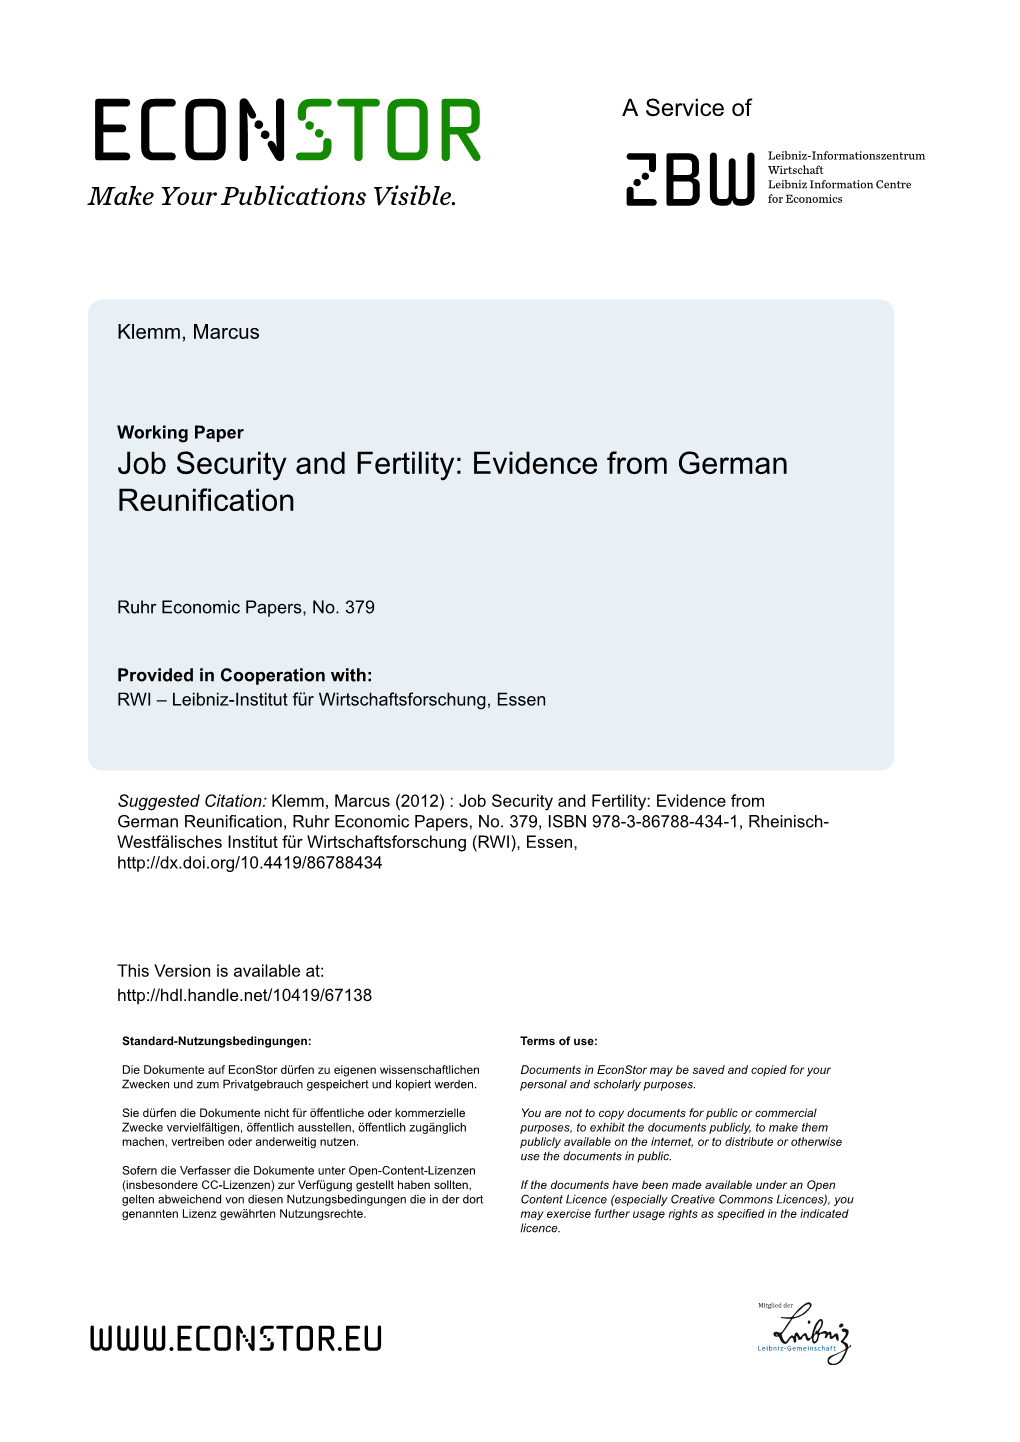 Job Security and Fertility: Evidence from German Reunification